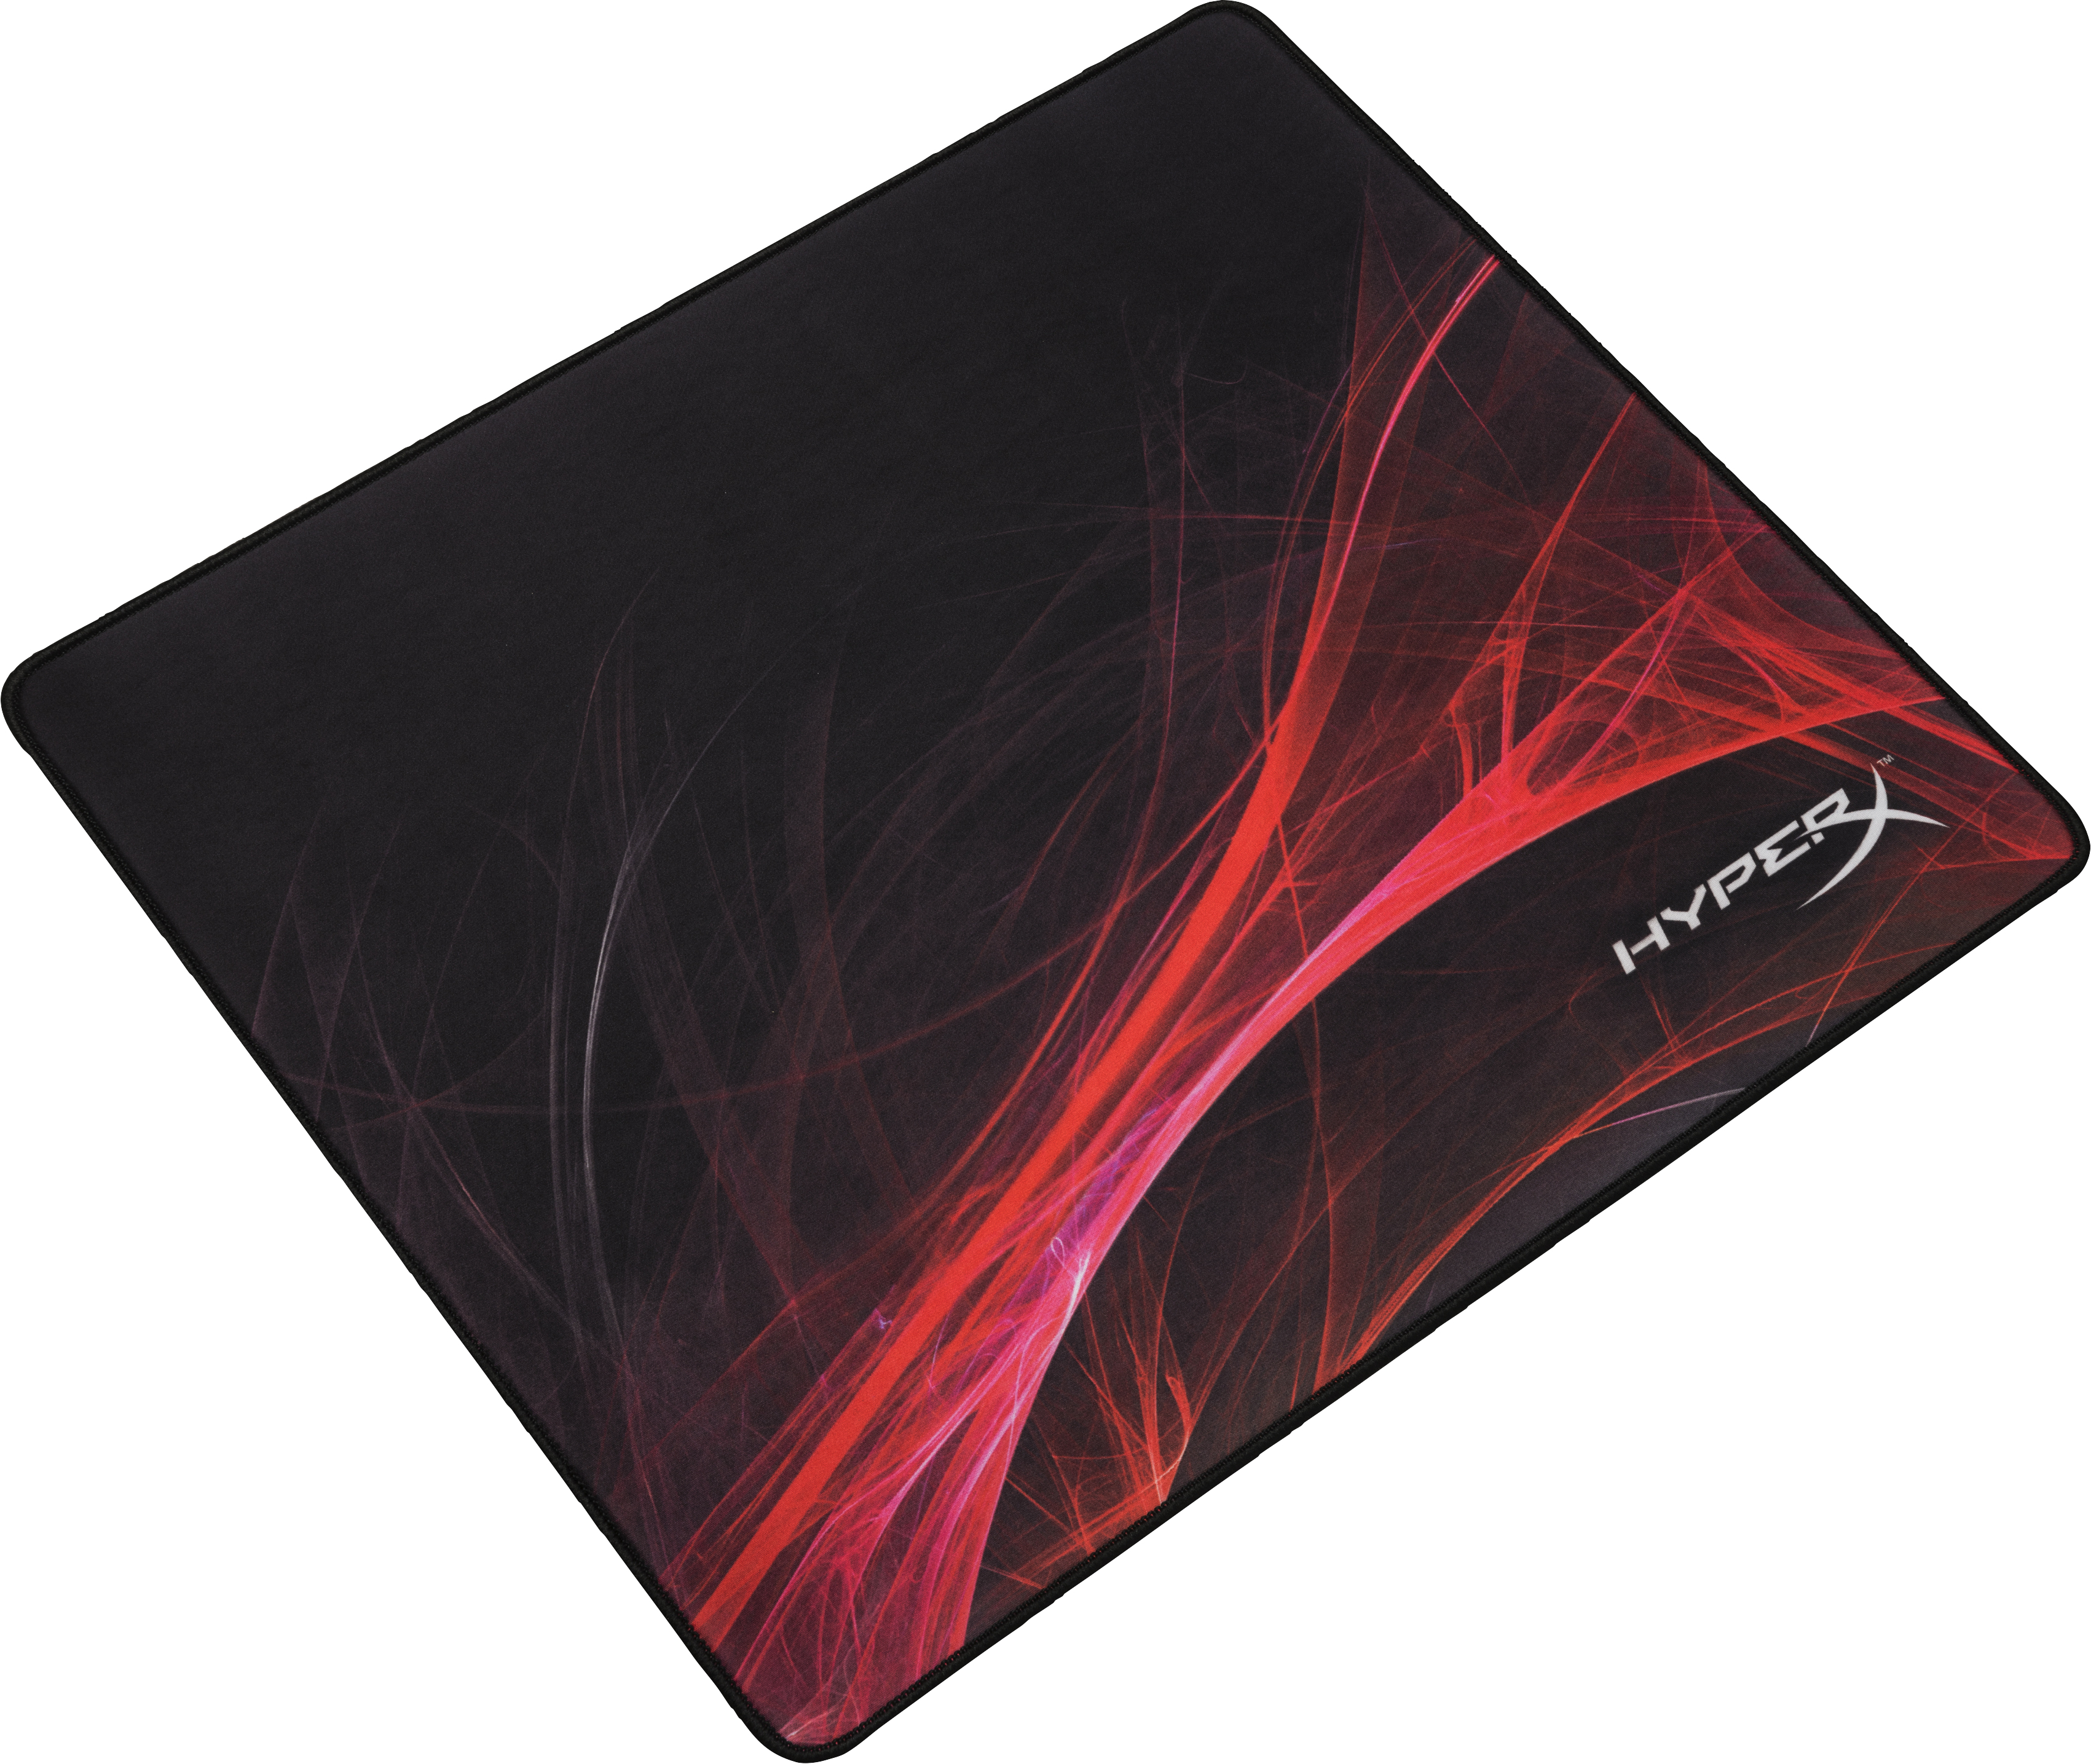 Hyperx Fury S Speed Edition Mousepad - Large (4P5Q6AA)